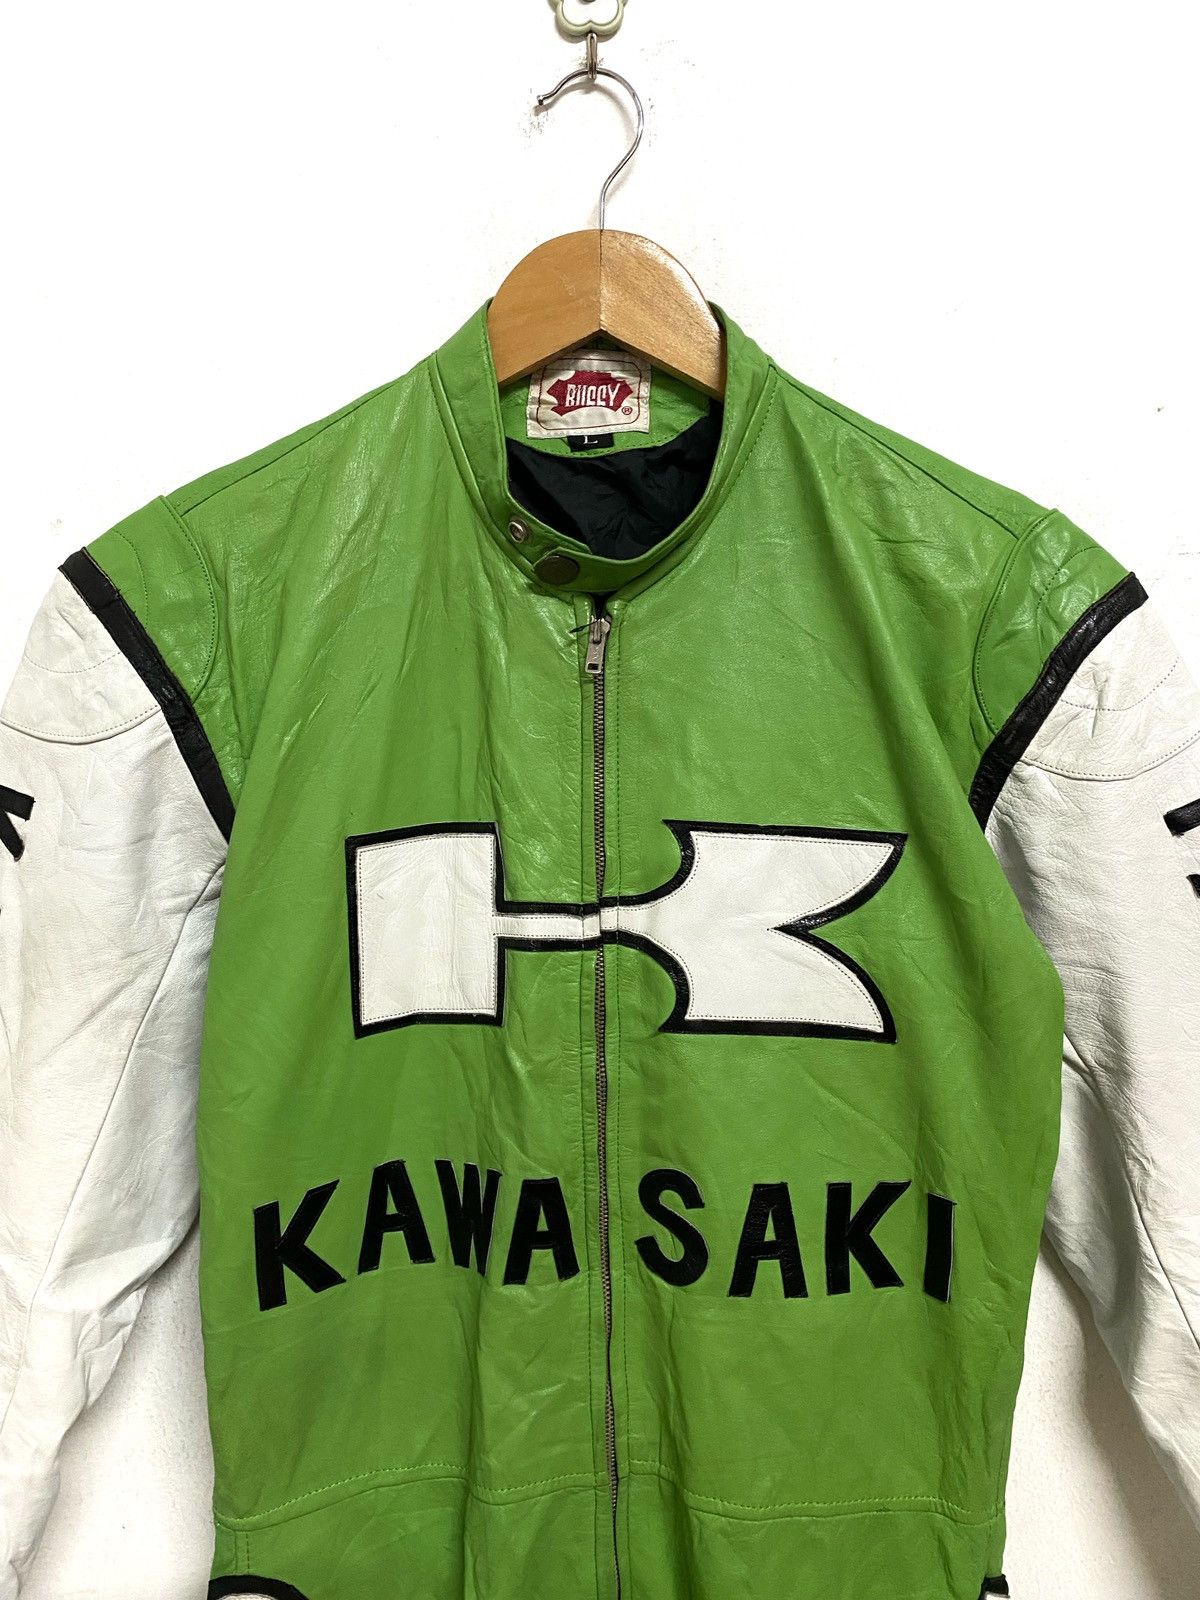 Sports Specialties - KAWASAKI Leather Racing Suit Overall - 2